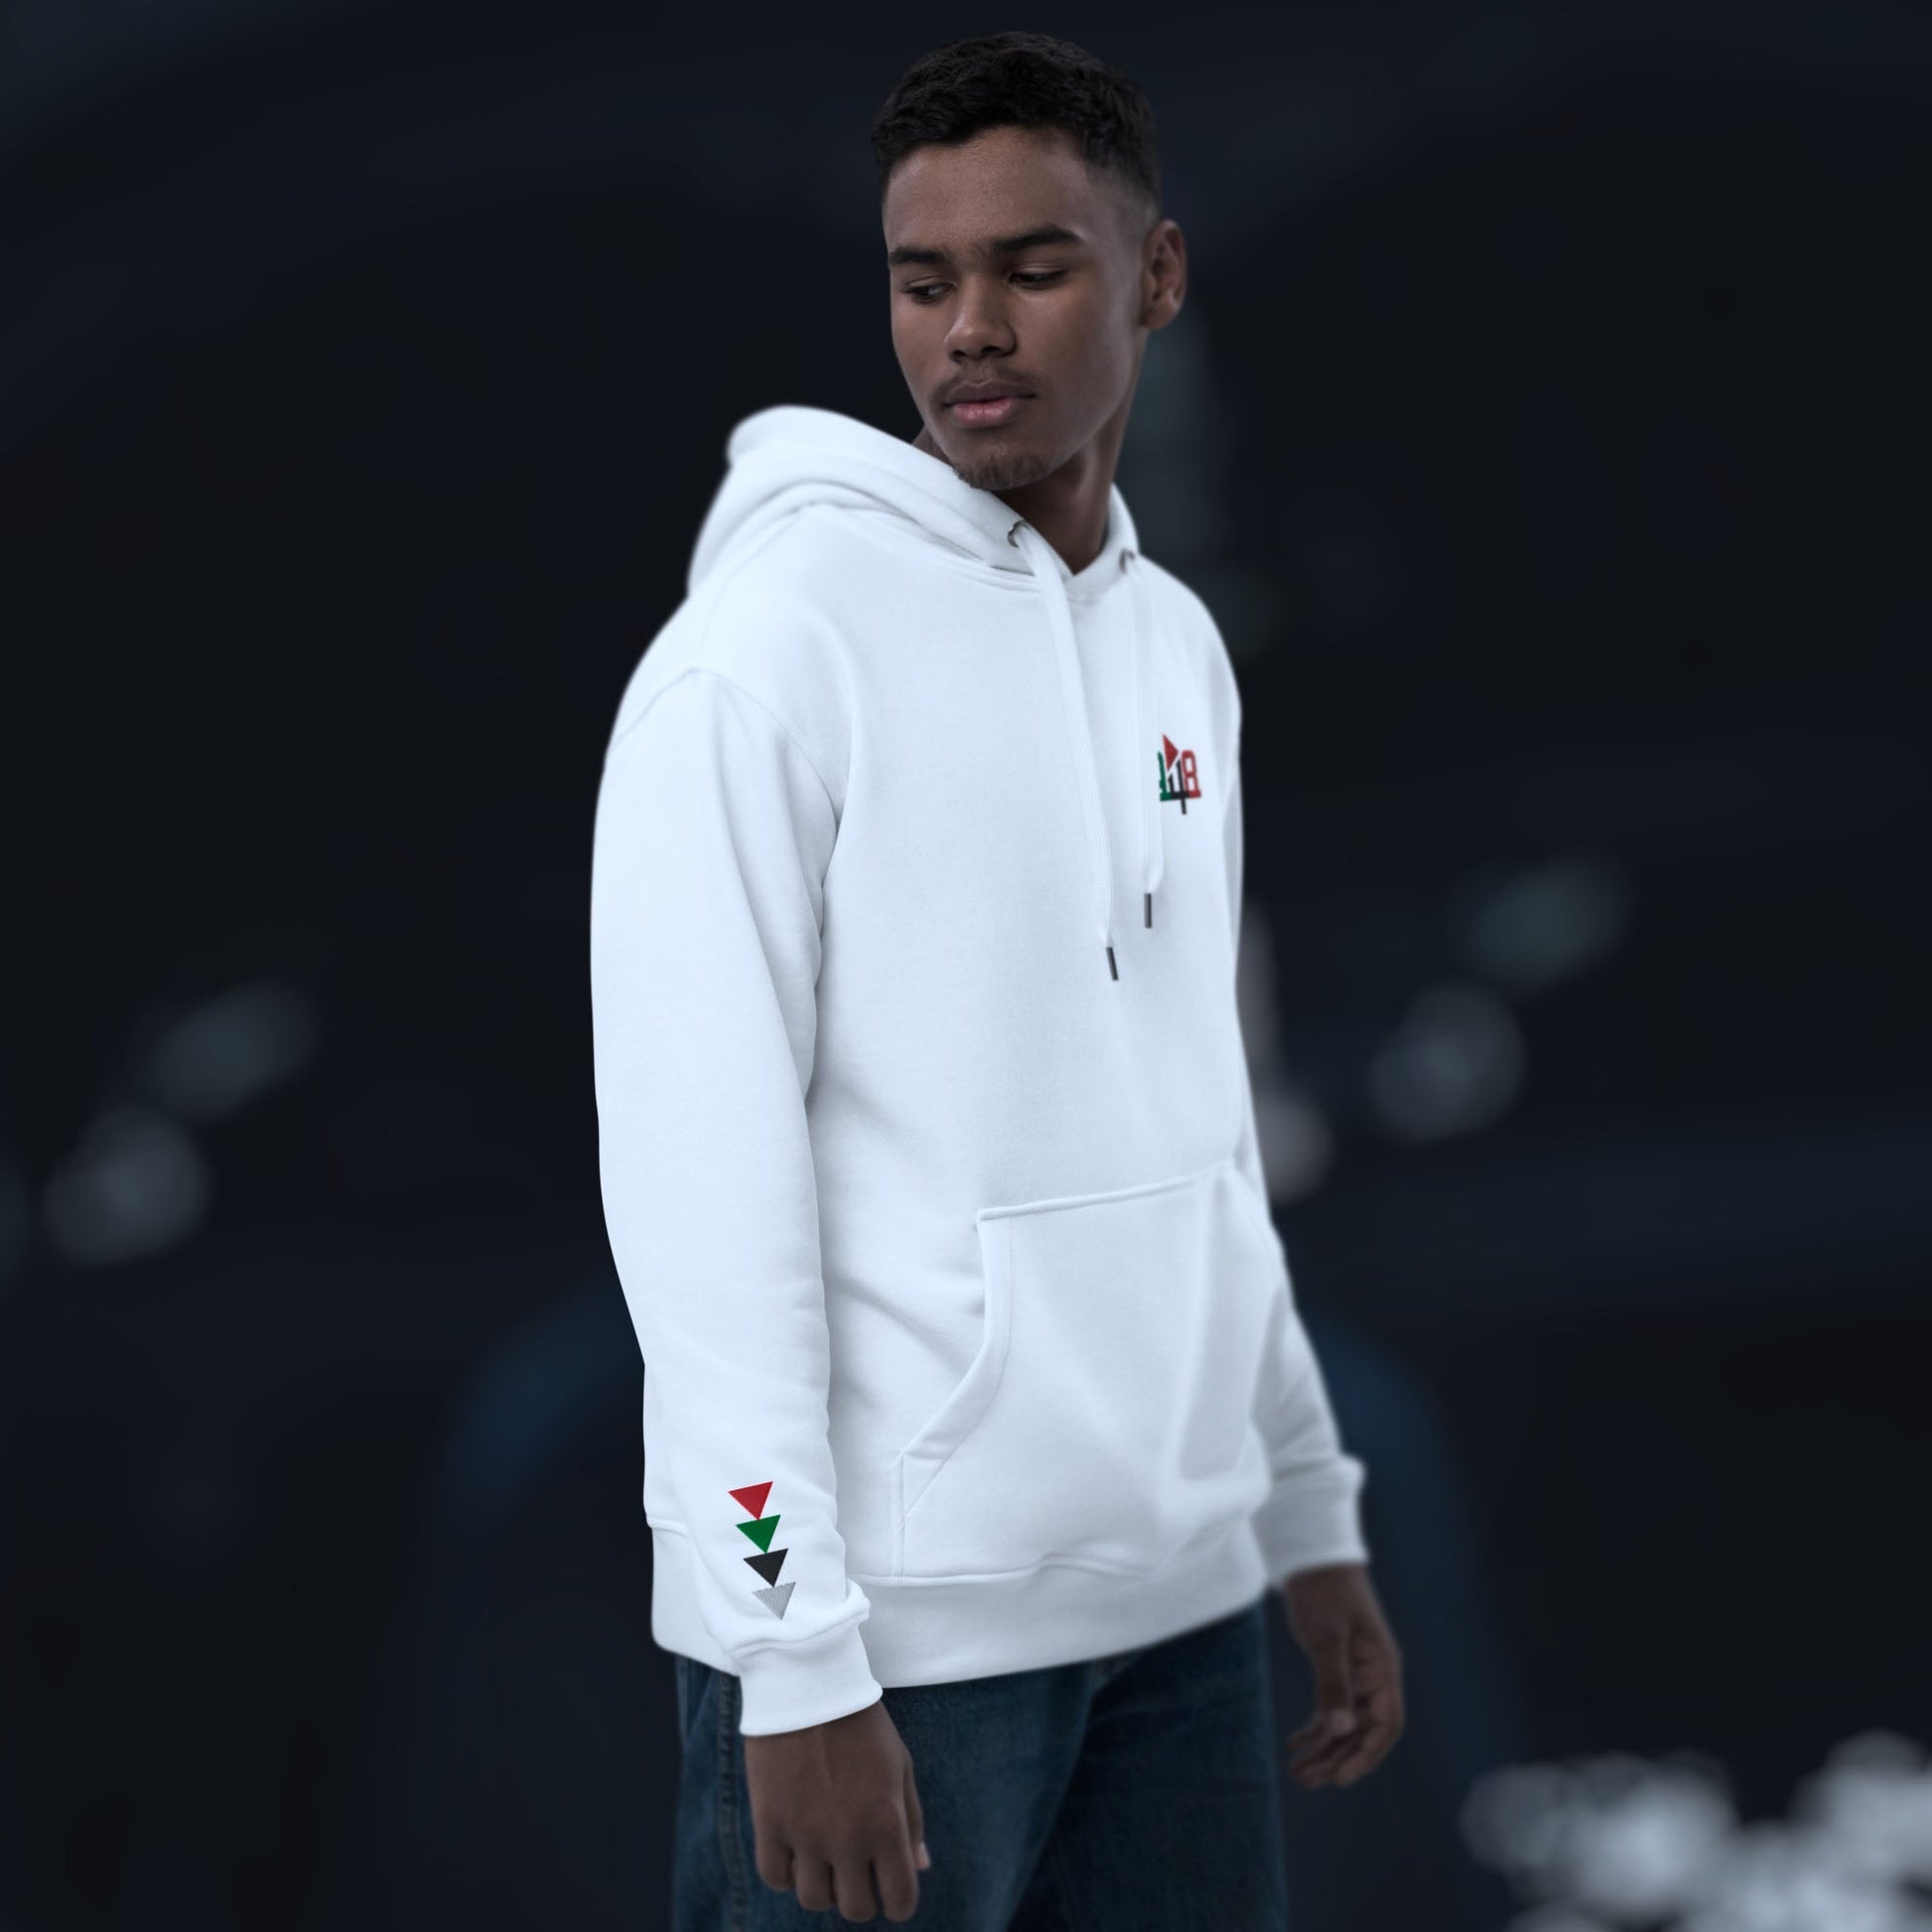 1948 - Limited Run Eco Hoodie - StandUpStrong